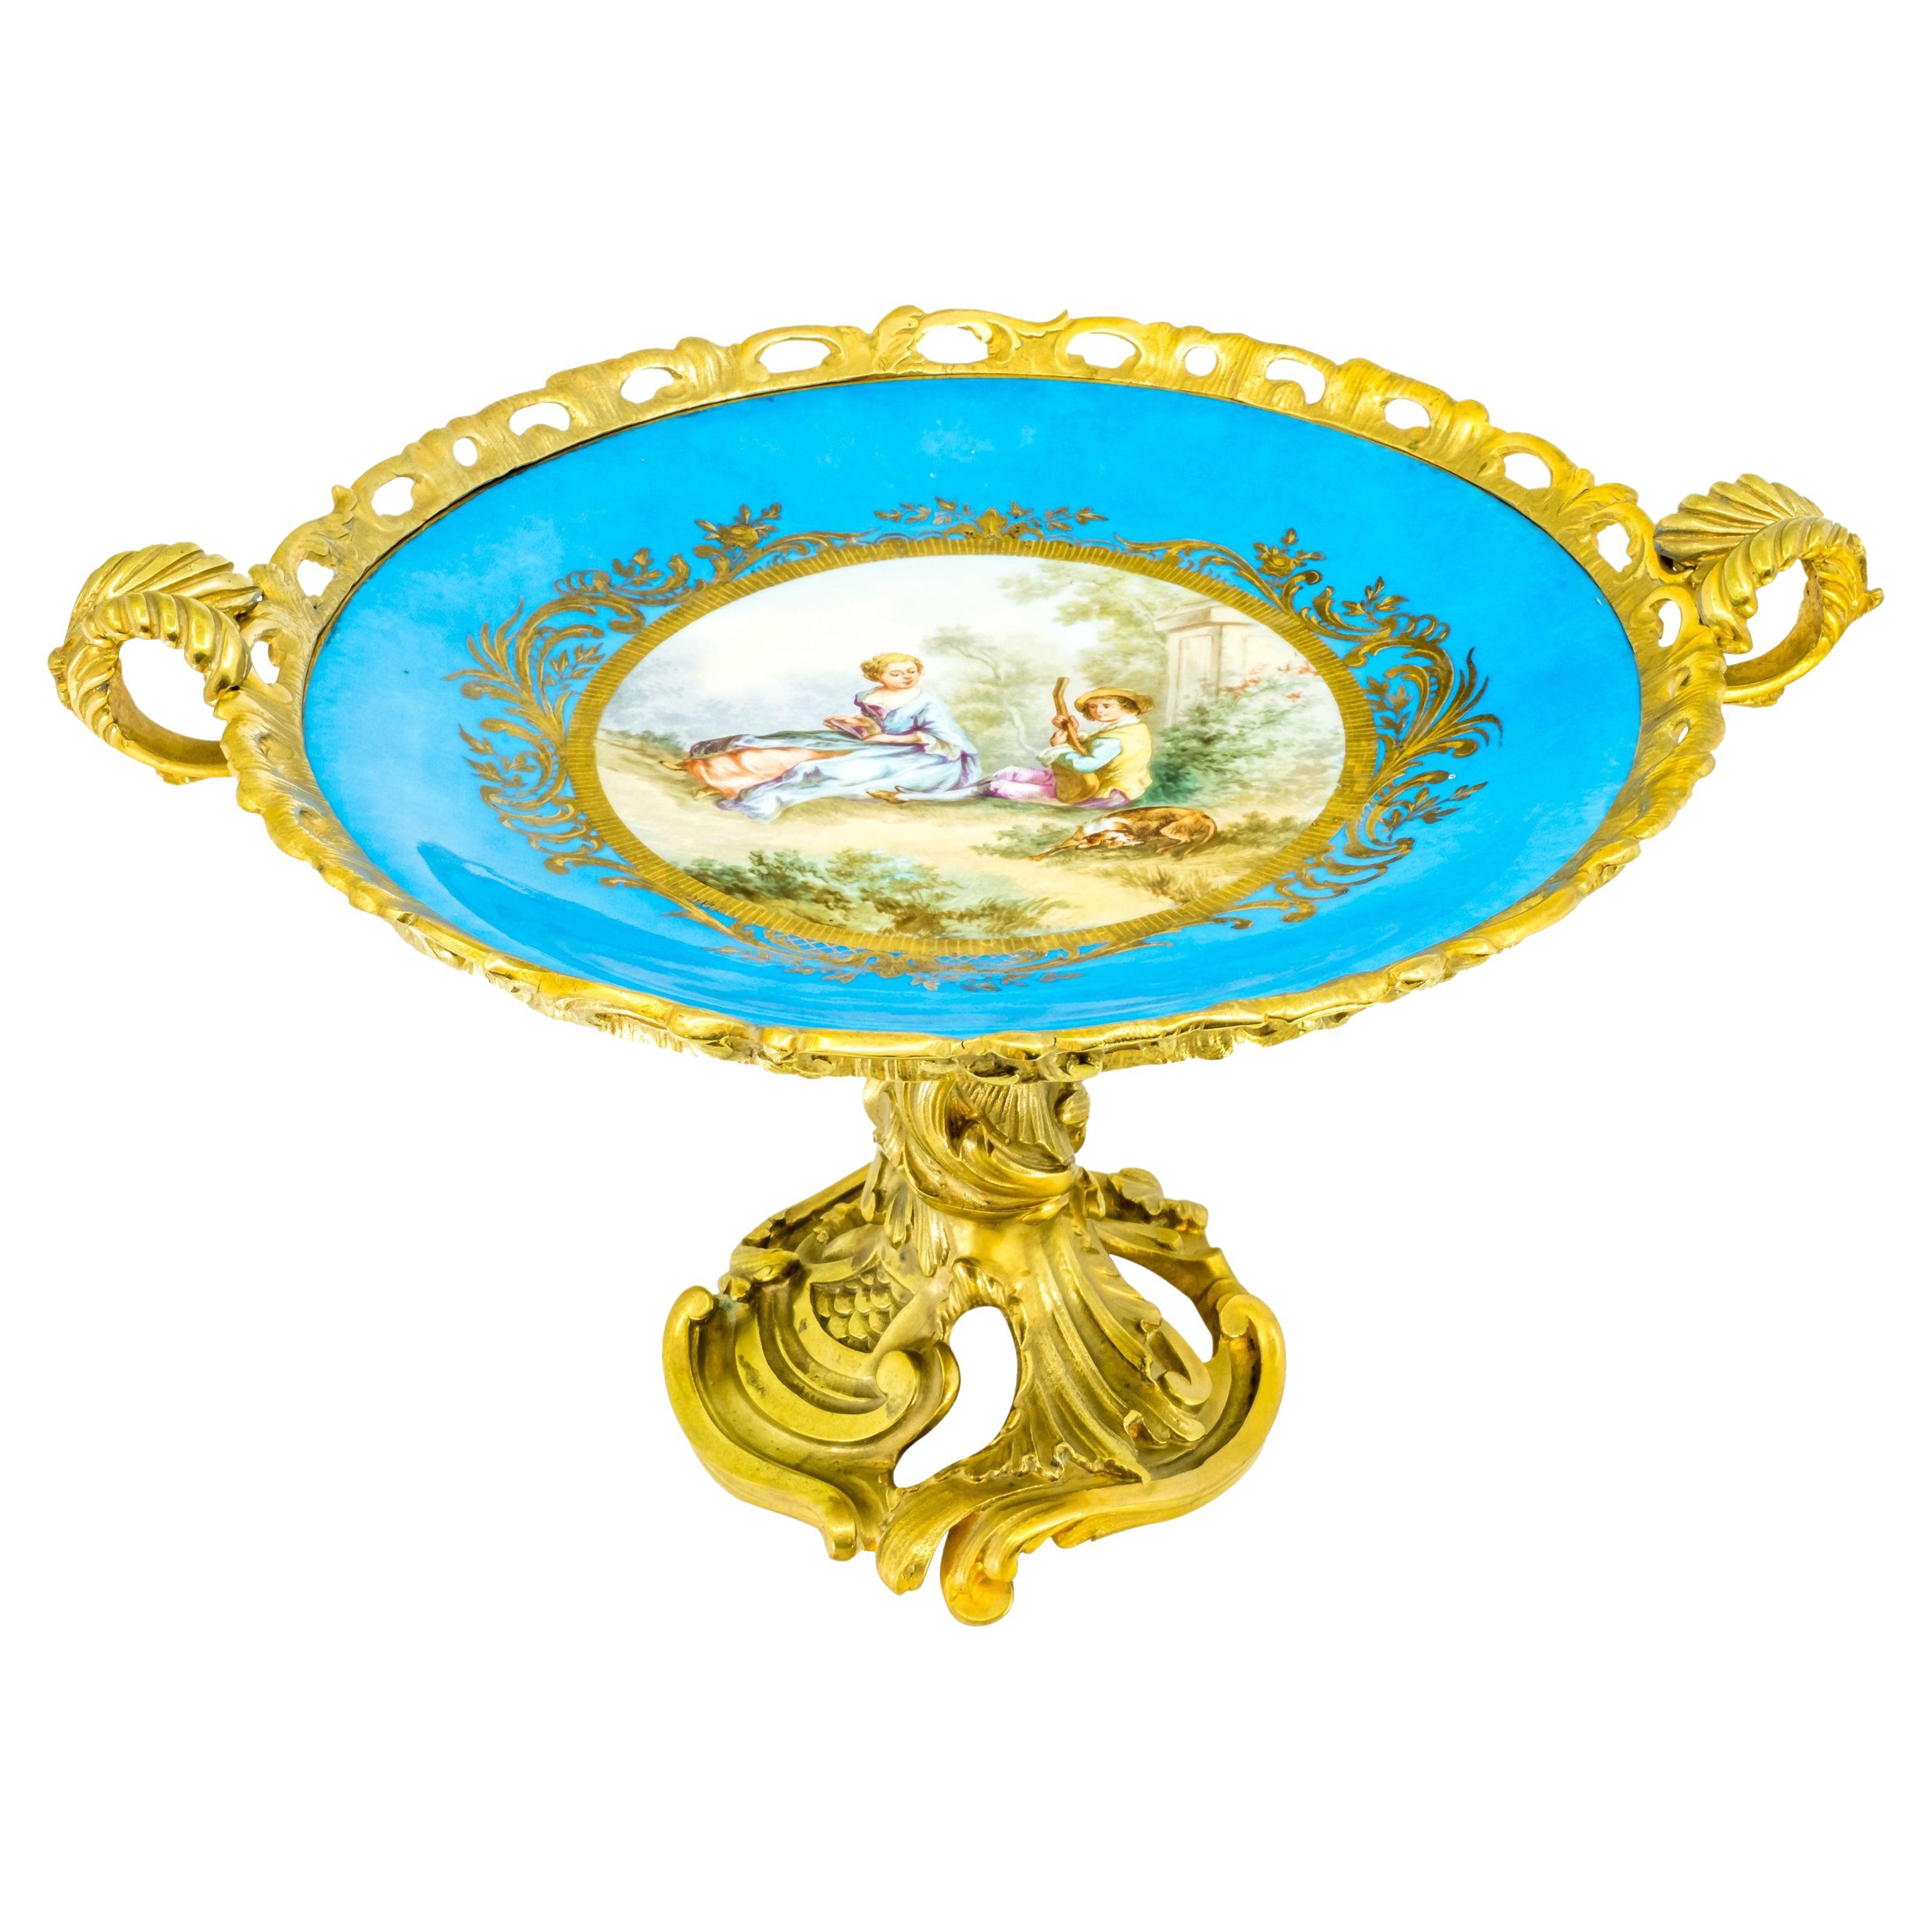 French Sèvres Porcelain and Ormolu-Mounted Hand-Painted Oval ...